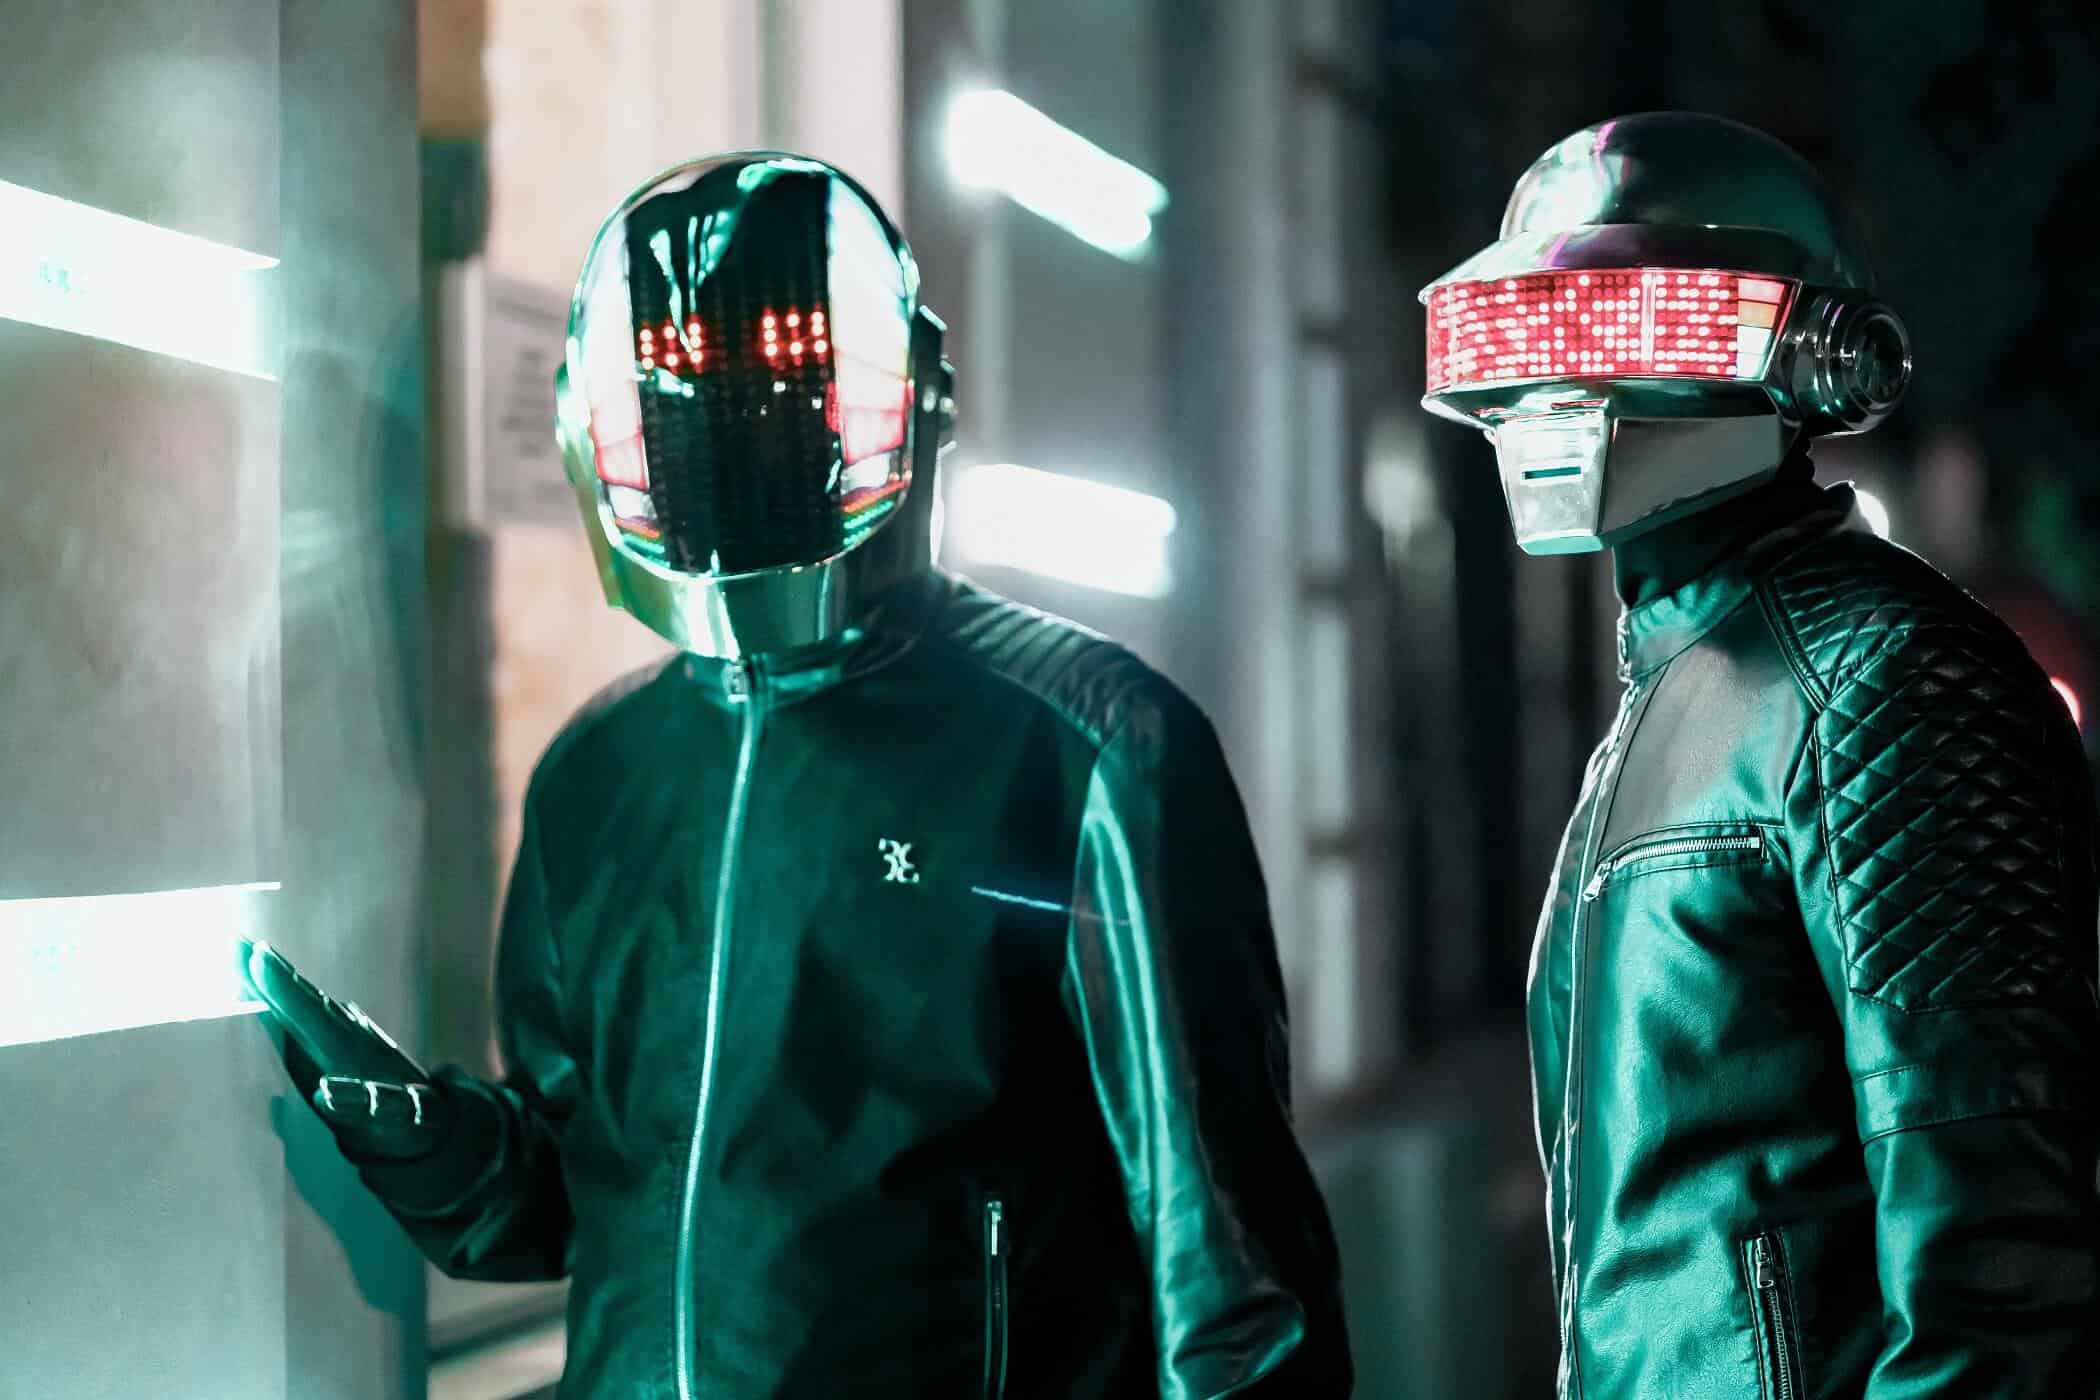 Daft Punk hit ‘Around The World’ is trending again on Beatport, 26 years after release